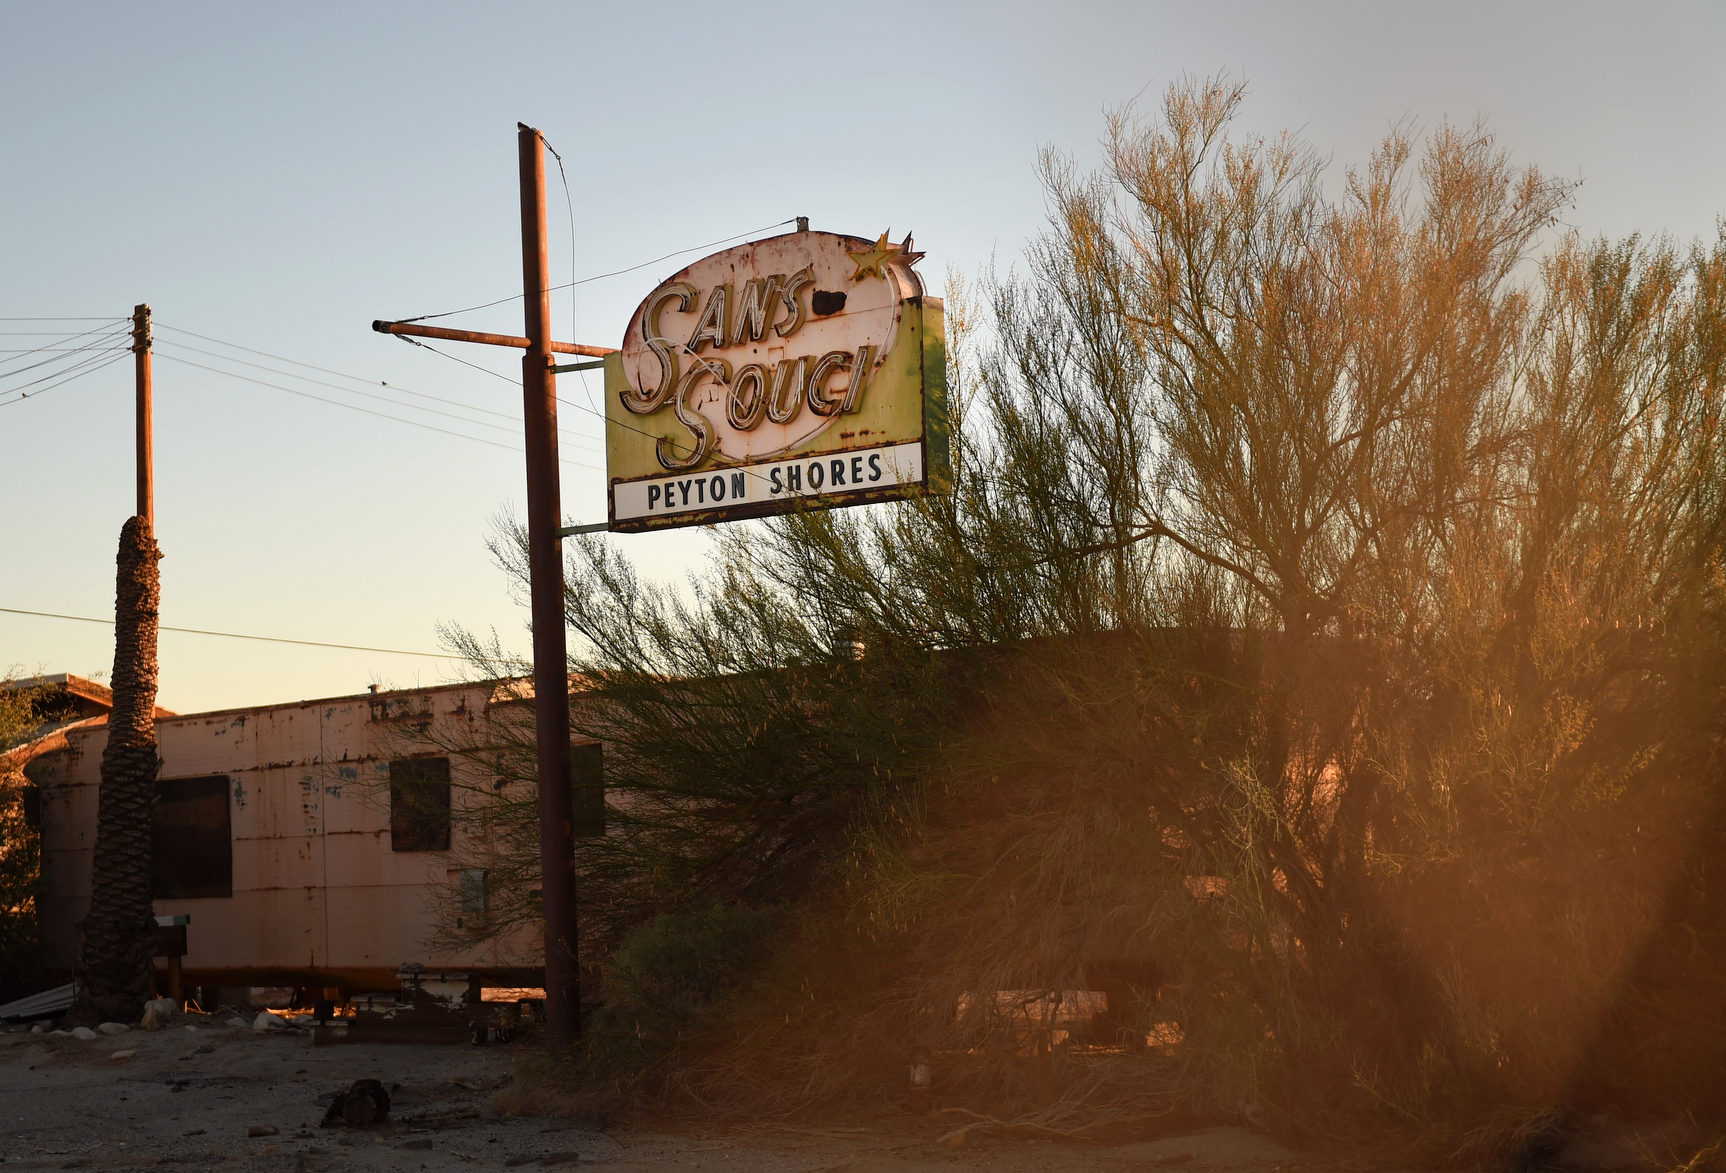 A sign for an abandoned bar in Desert Shores near the Salto Sea. Photo taken on February 10, 2022.